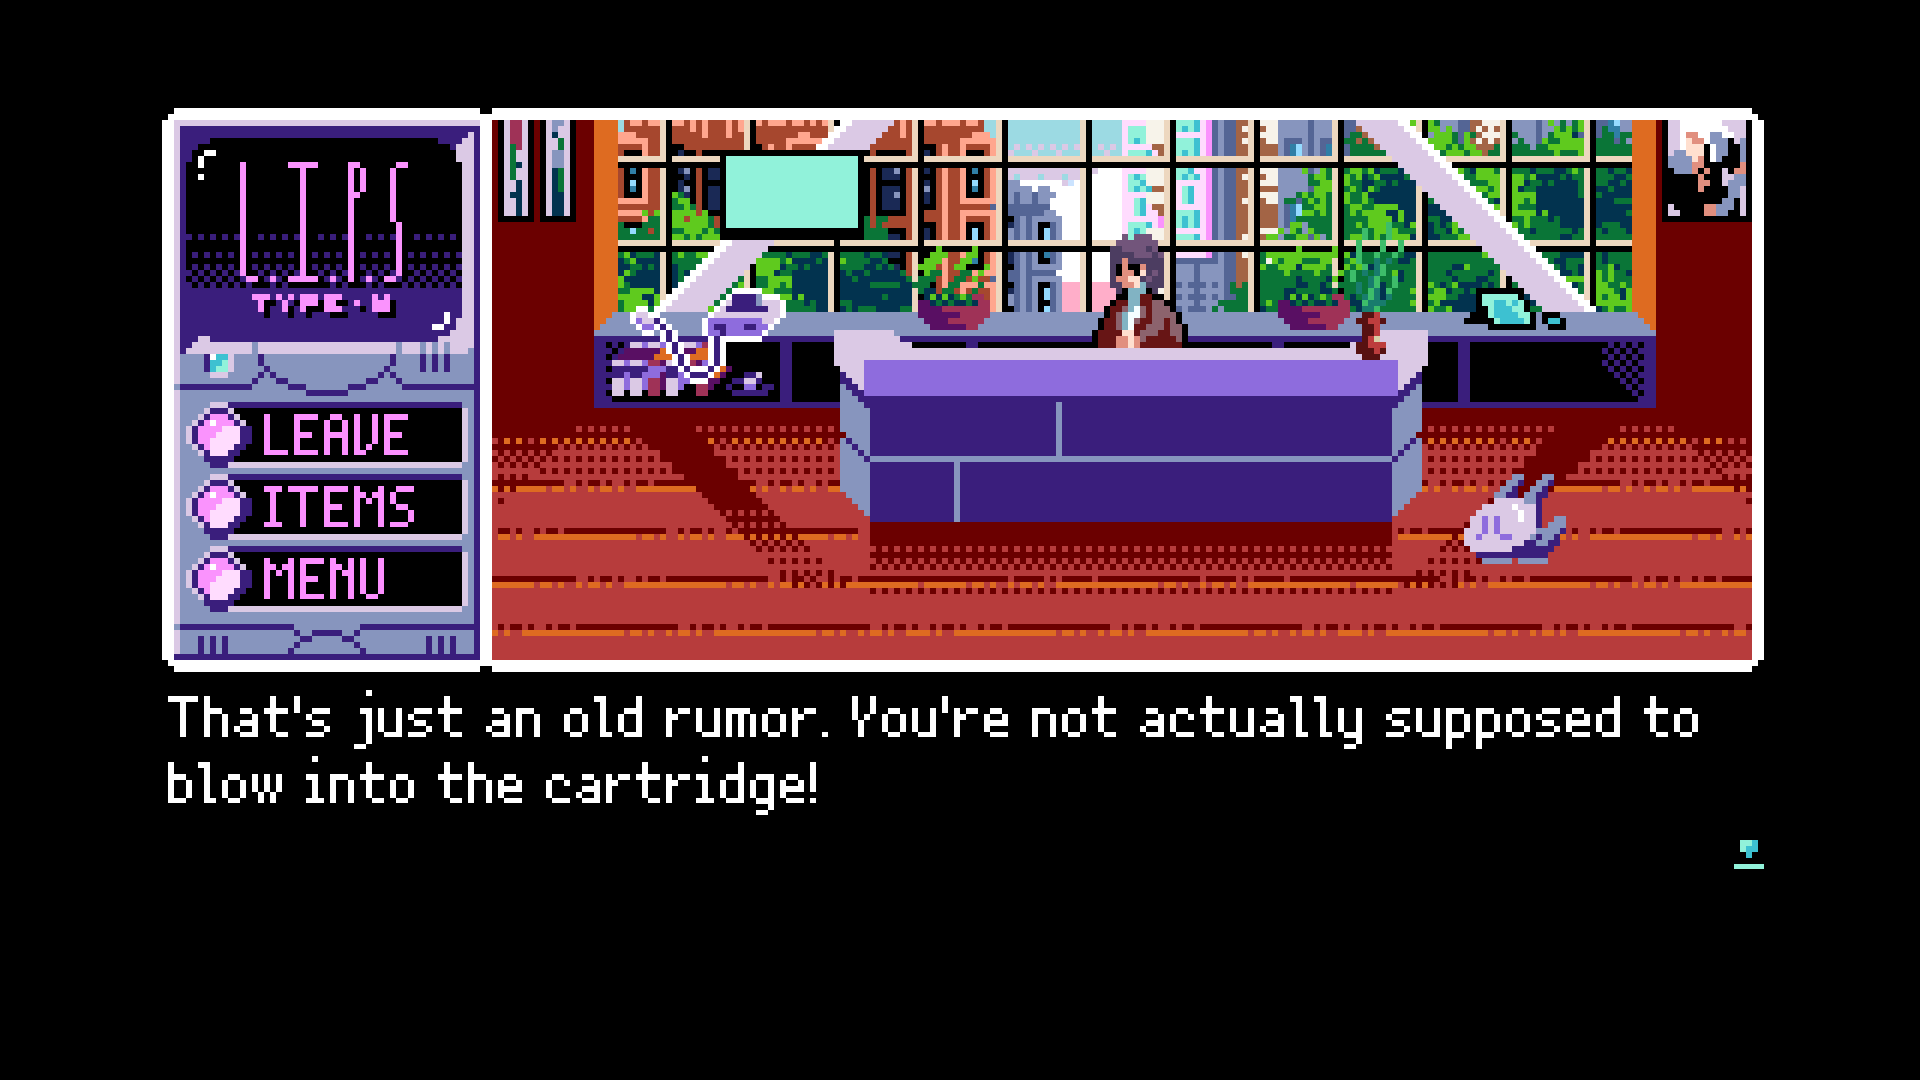 2064_ Read Only Memories_20170115124114